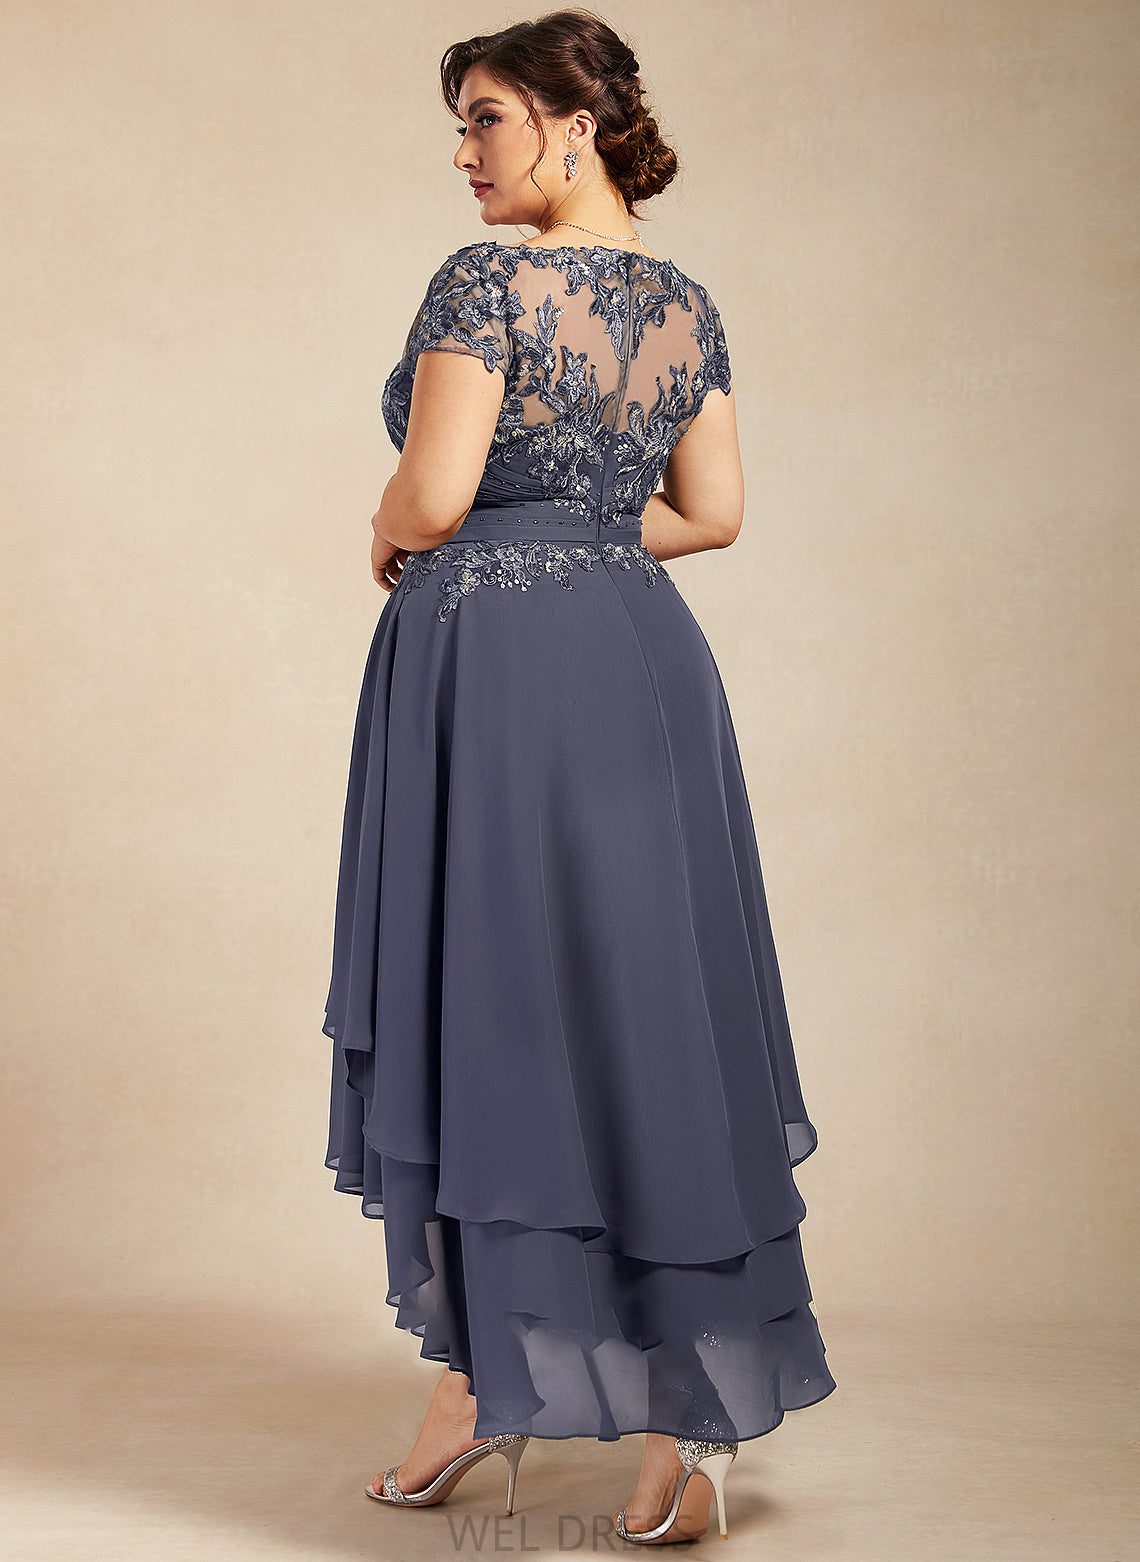 Beading the With Asymmetrical Dress Scoop Mother of the Bride Dresses of Mother Lace Neck Diamond Bride Chiffon A-Line